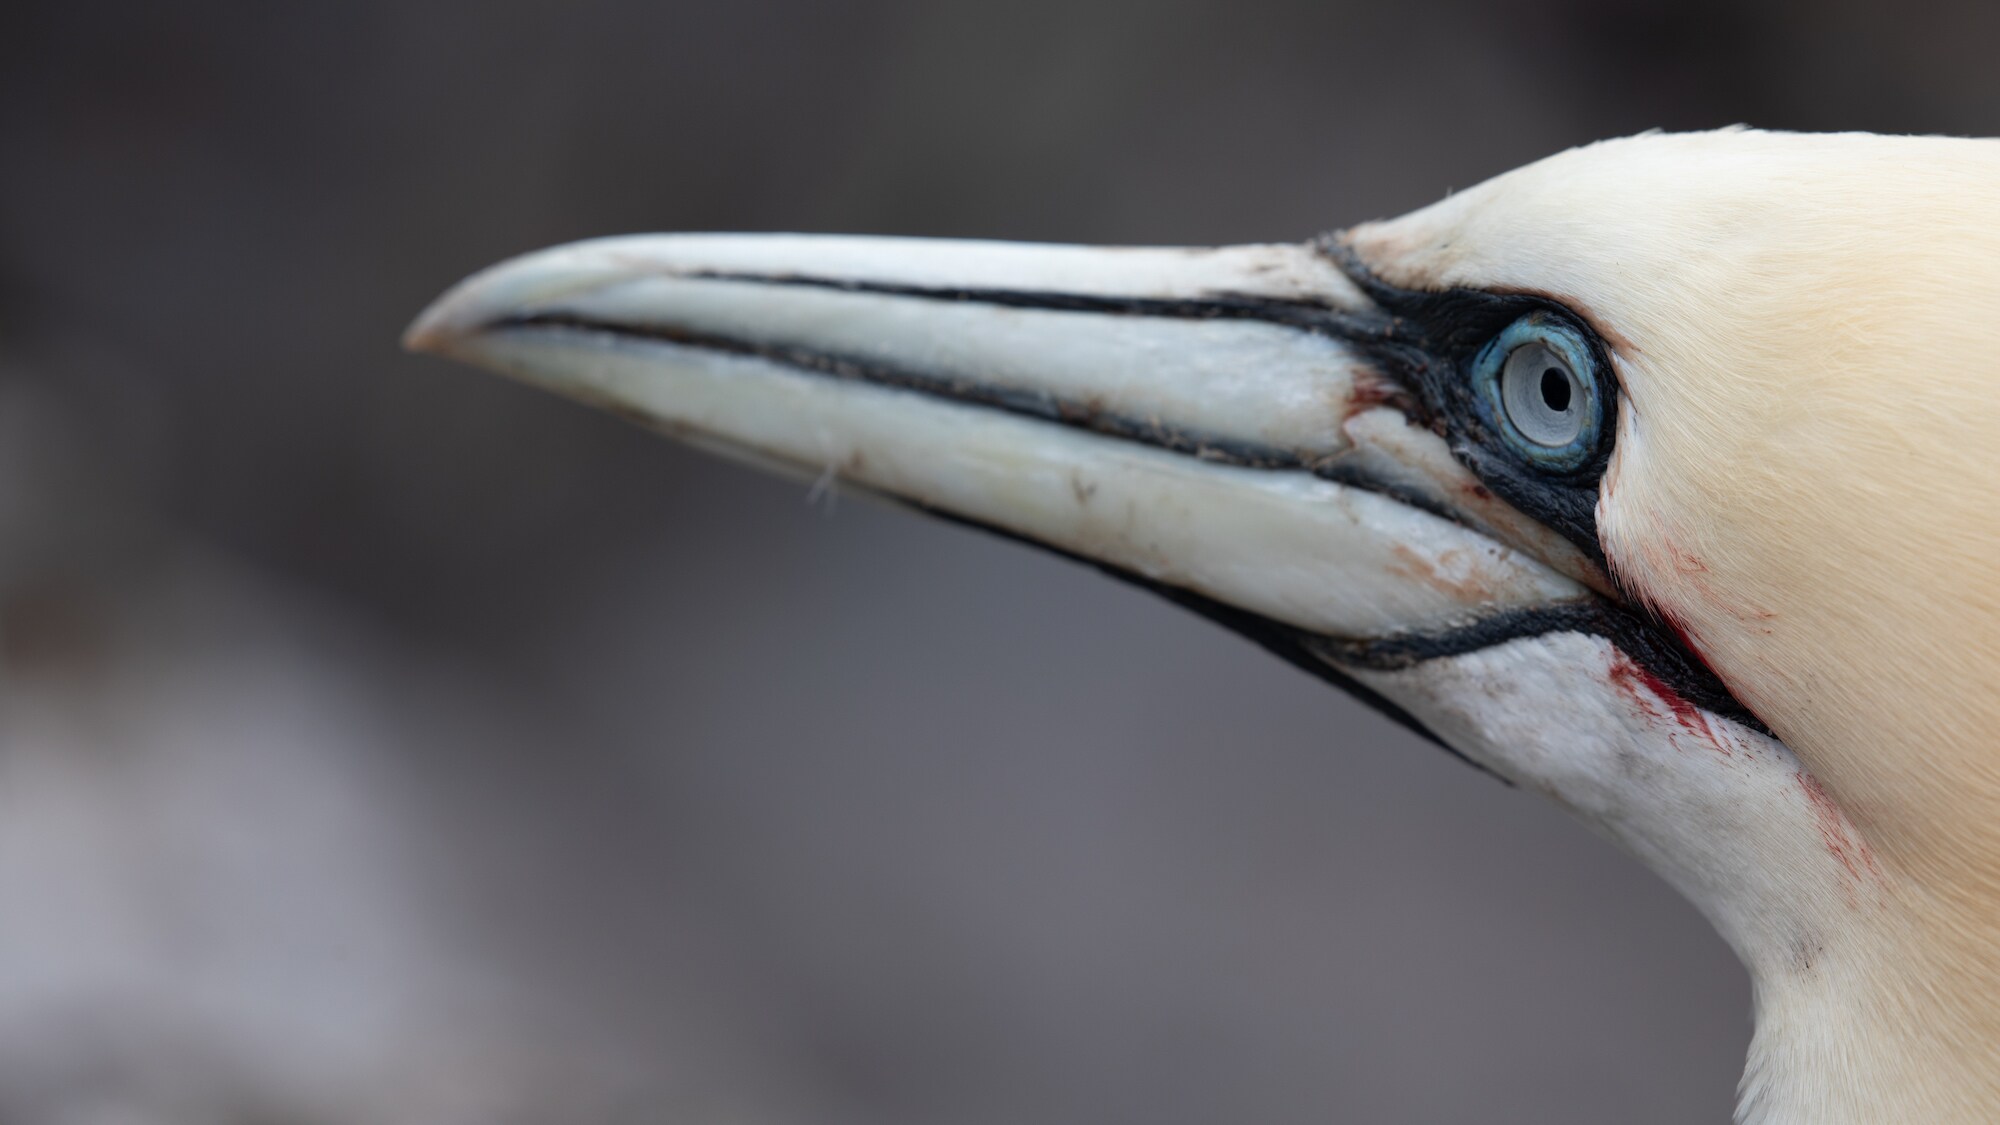 Northern gannet's eye and beak with blood marks.  (National Geographic for Disney+/Eloisa Noble)